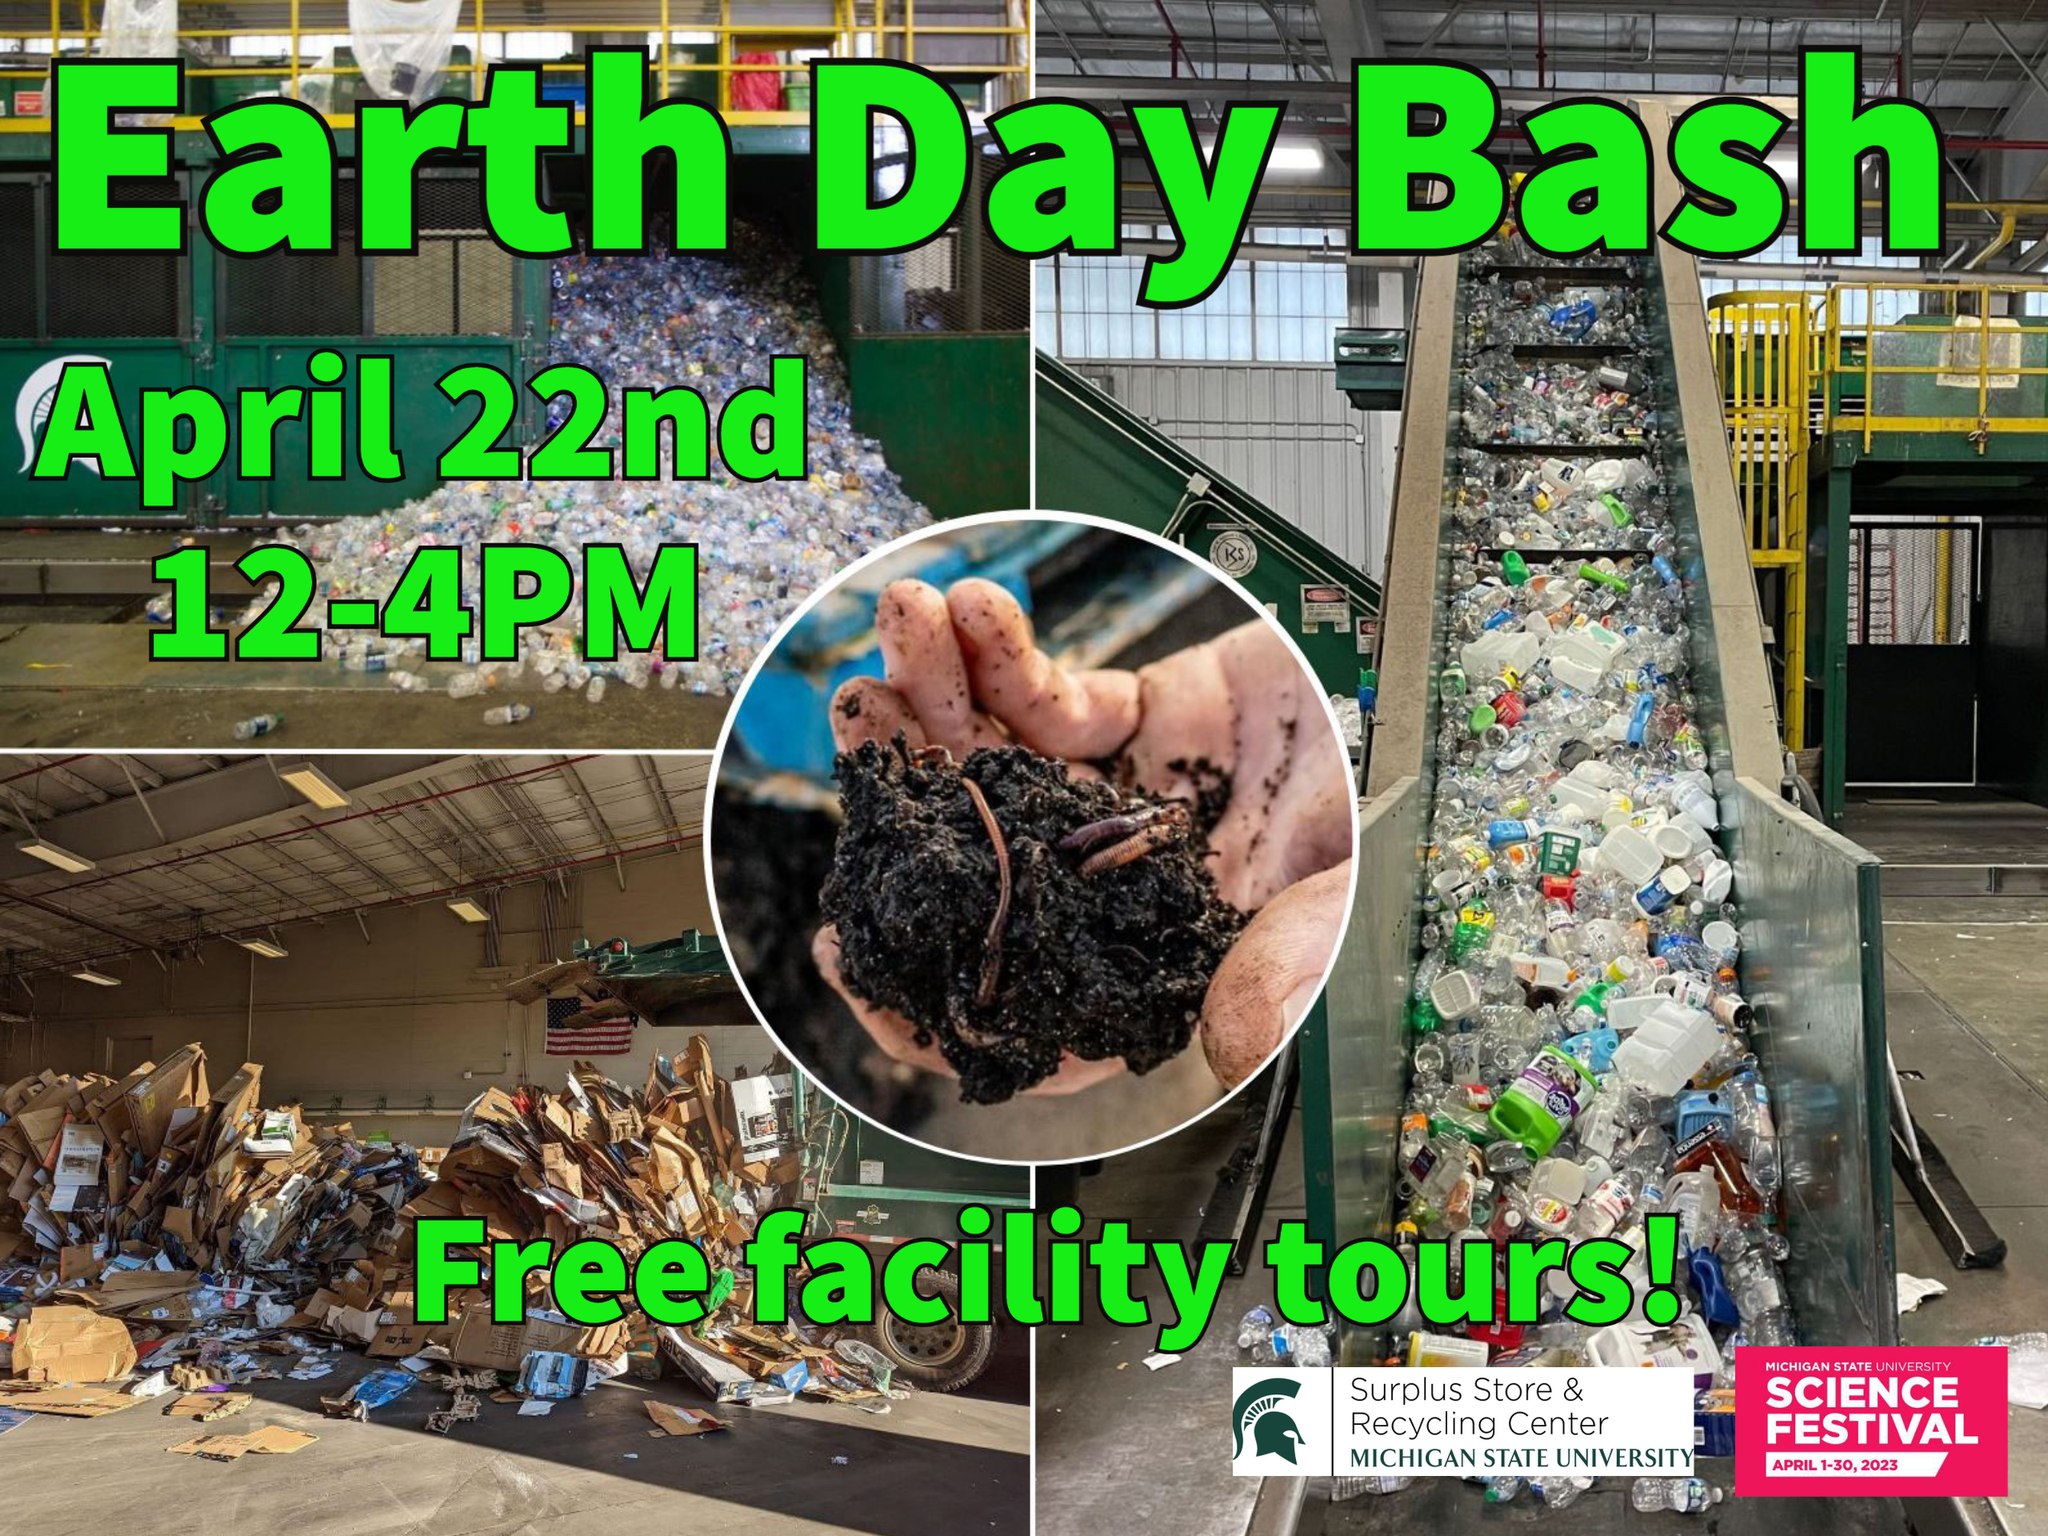 Earth Day Bash April 22 12-4 pm Free Facility tours! Surplus Store and Recycling Center. Science Festival.